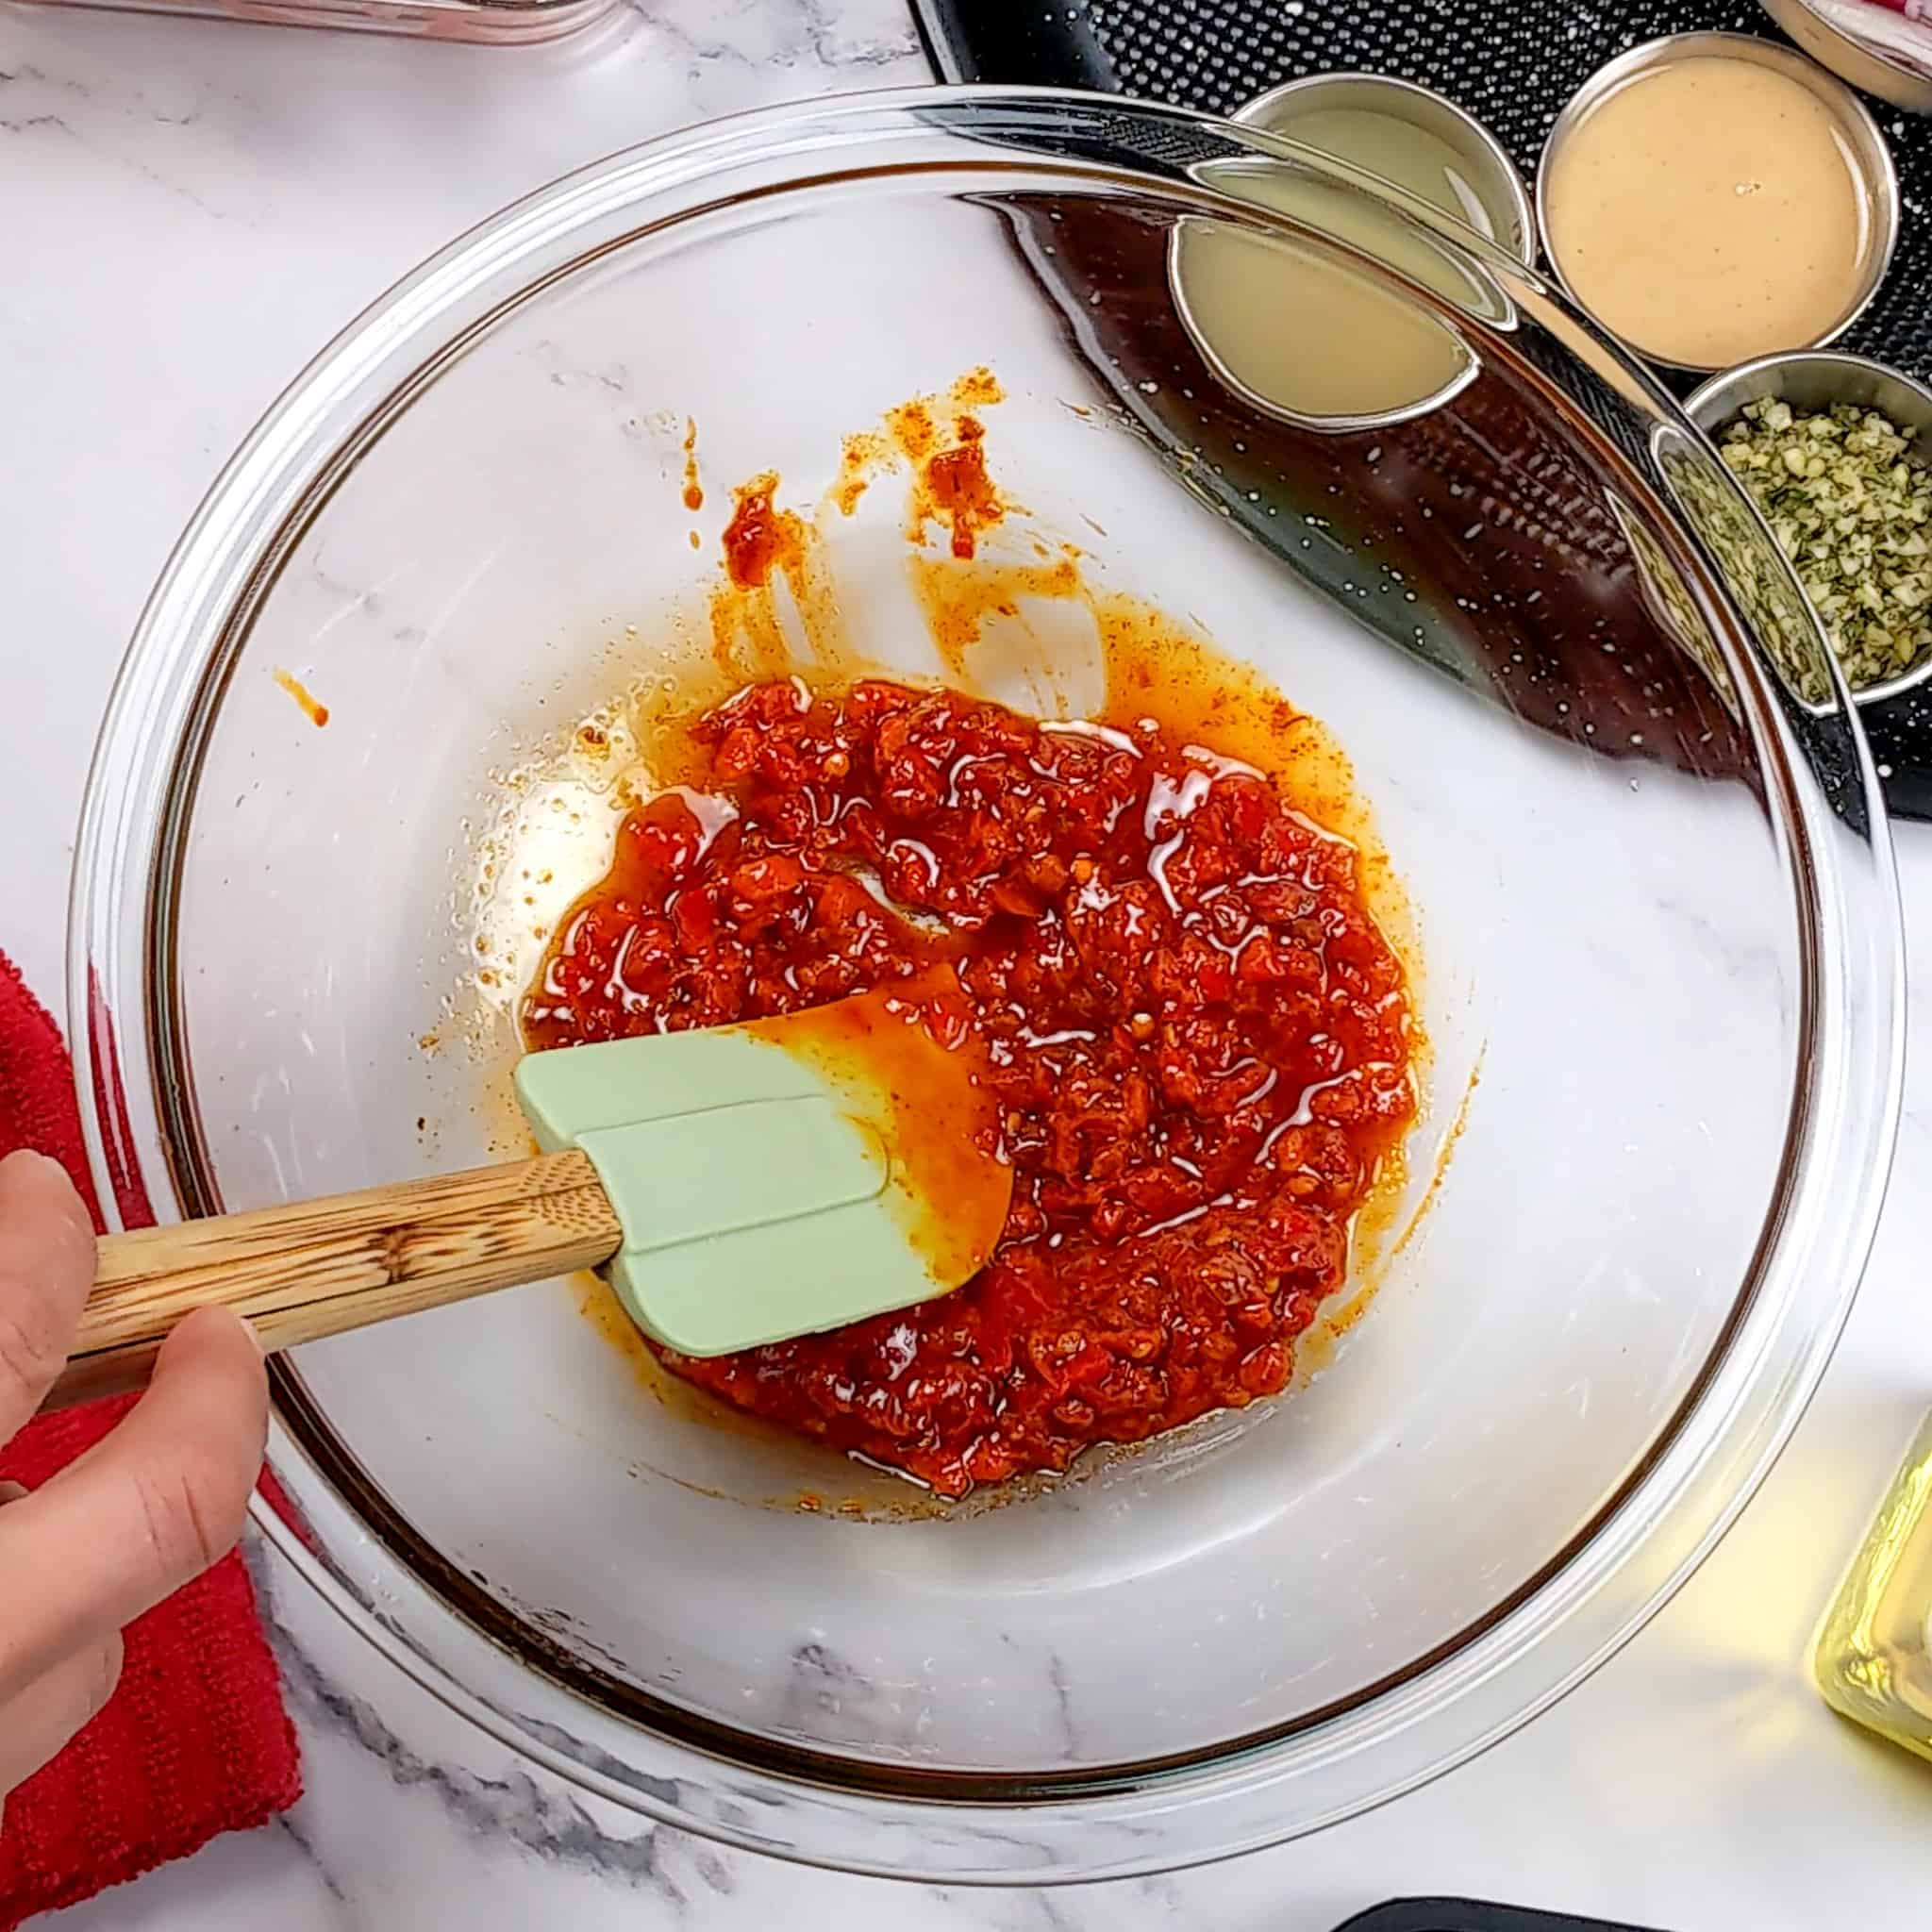 The calabrian chili wet rub in a pyrex glass mixing bowl being mixed with a kitchenaid silicone spatula with a wooden handle